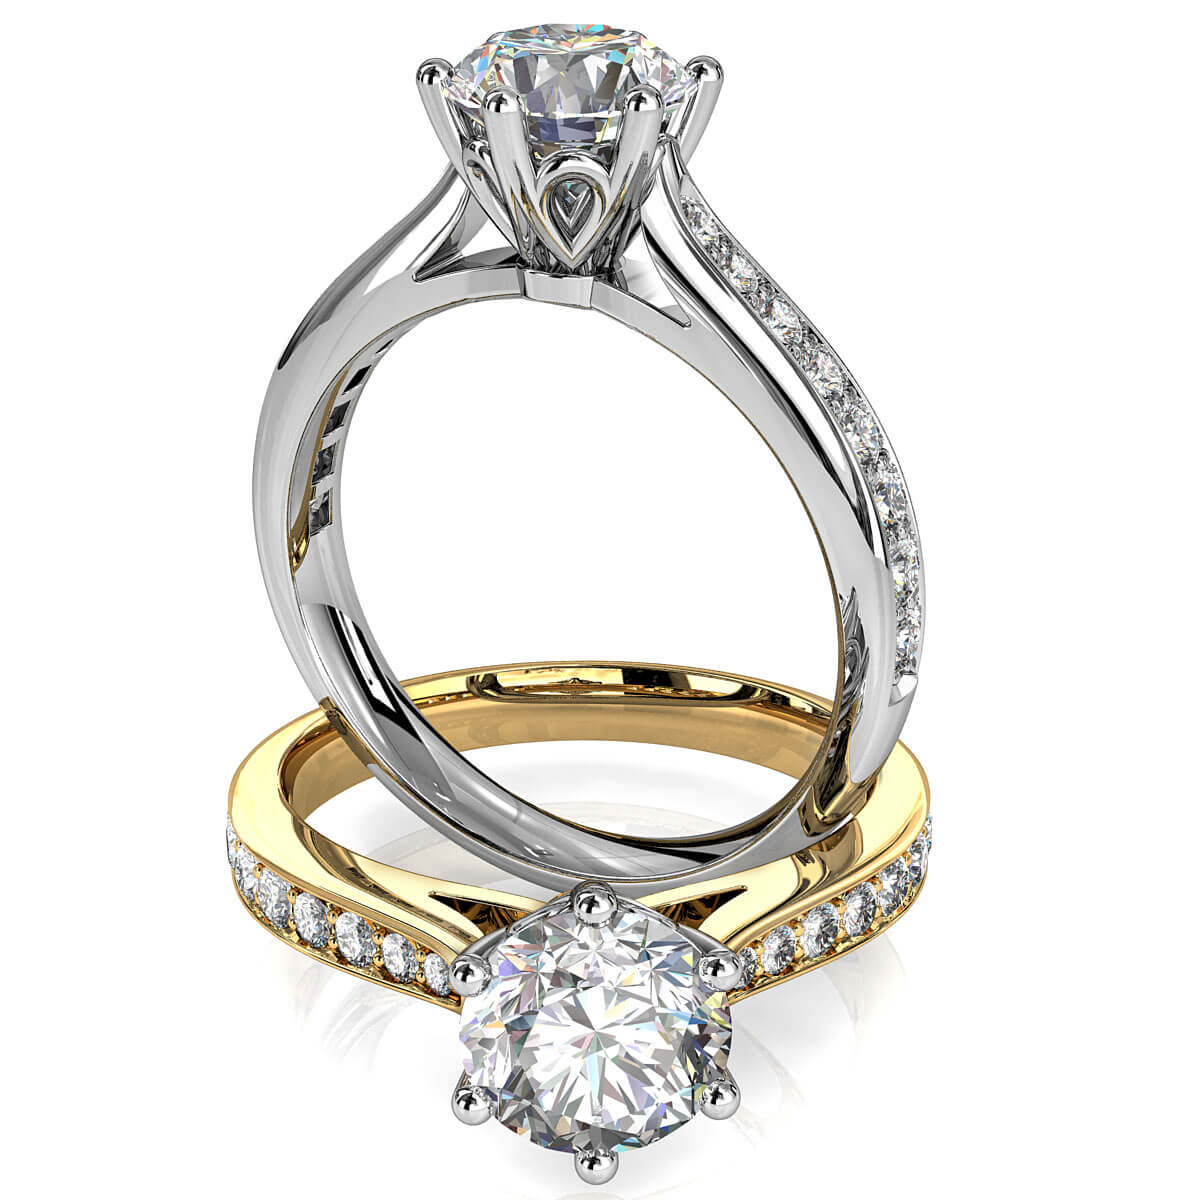 Round Brilliant Cut Solitaire Diamond Engagement Ring, 6 Fine Claws Set on Rounded Bead Set Band with Classic Loop Undersetting.